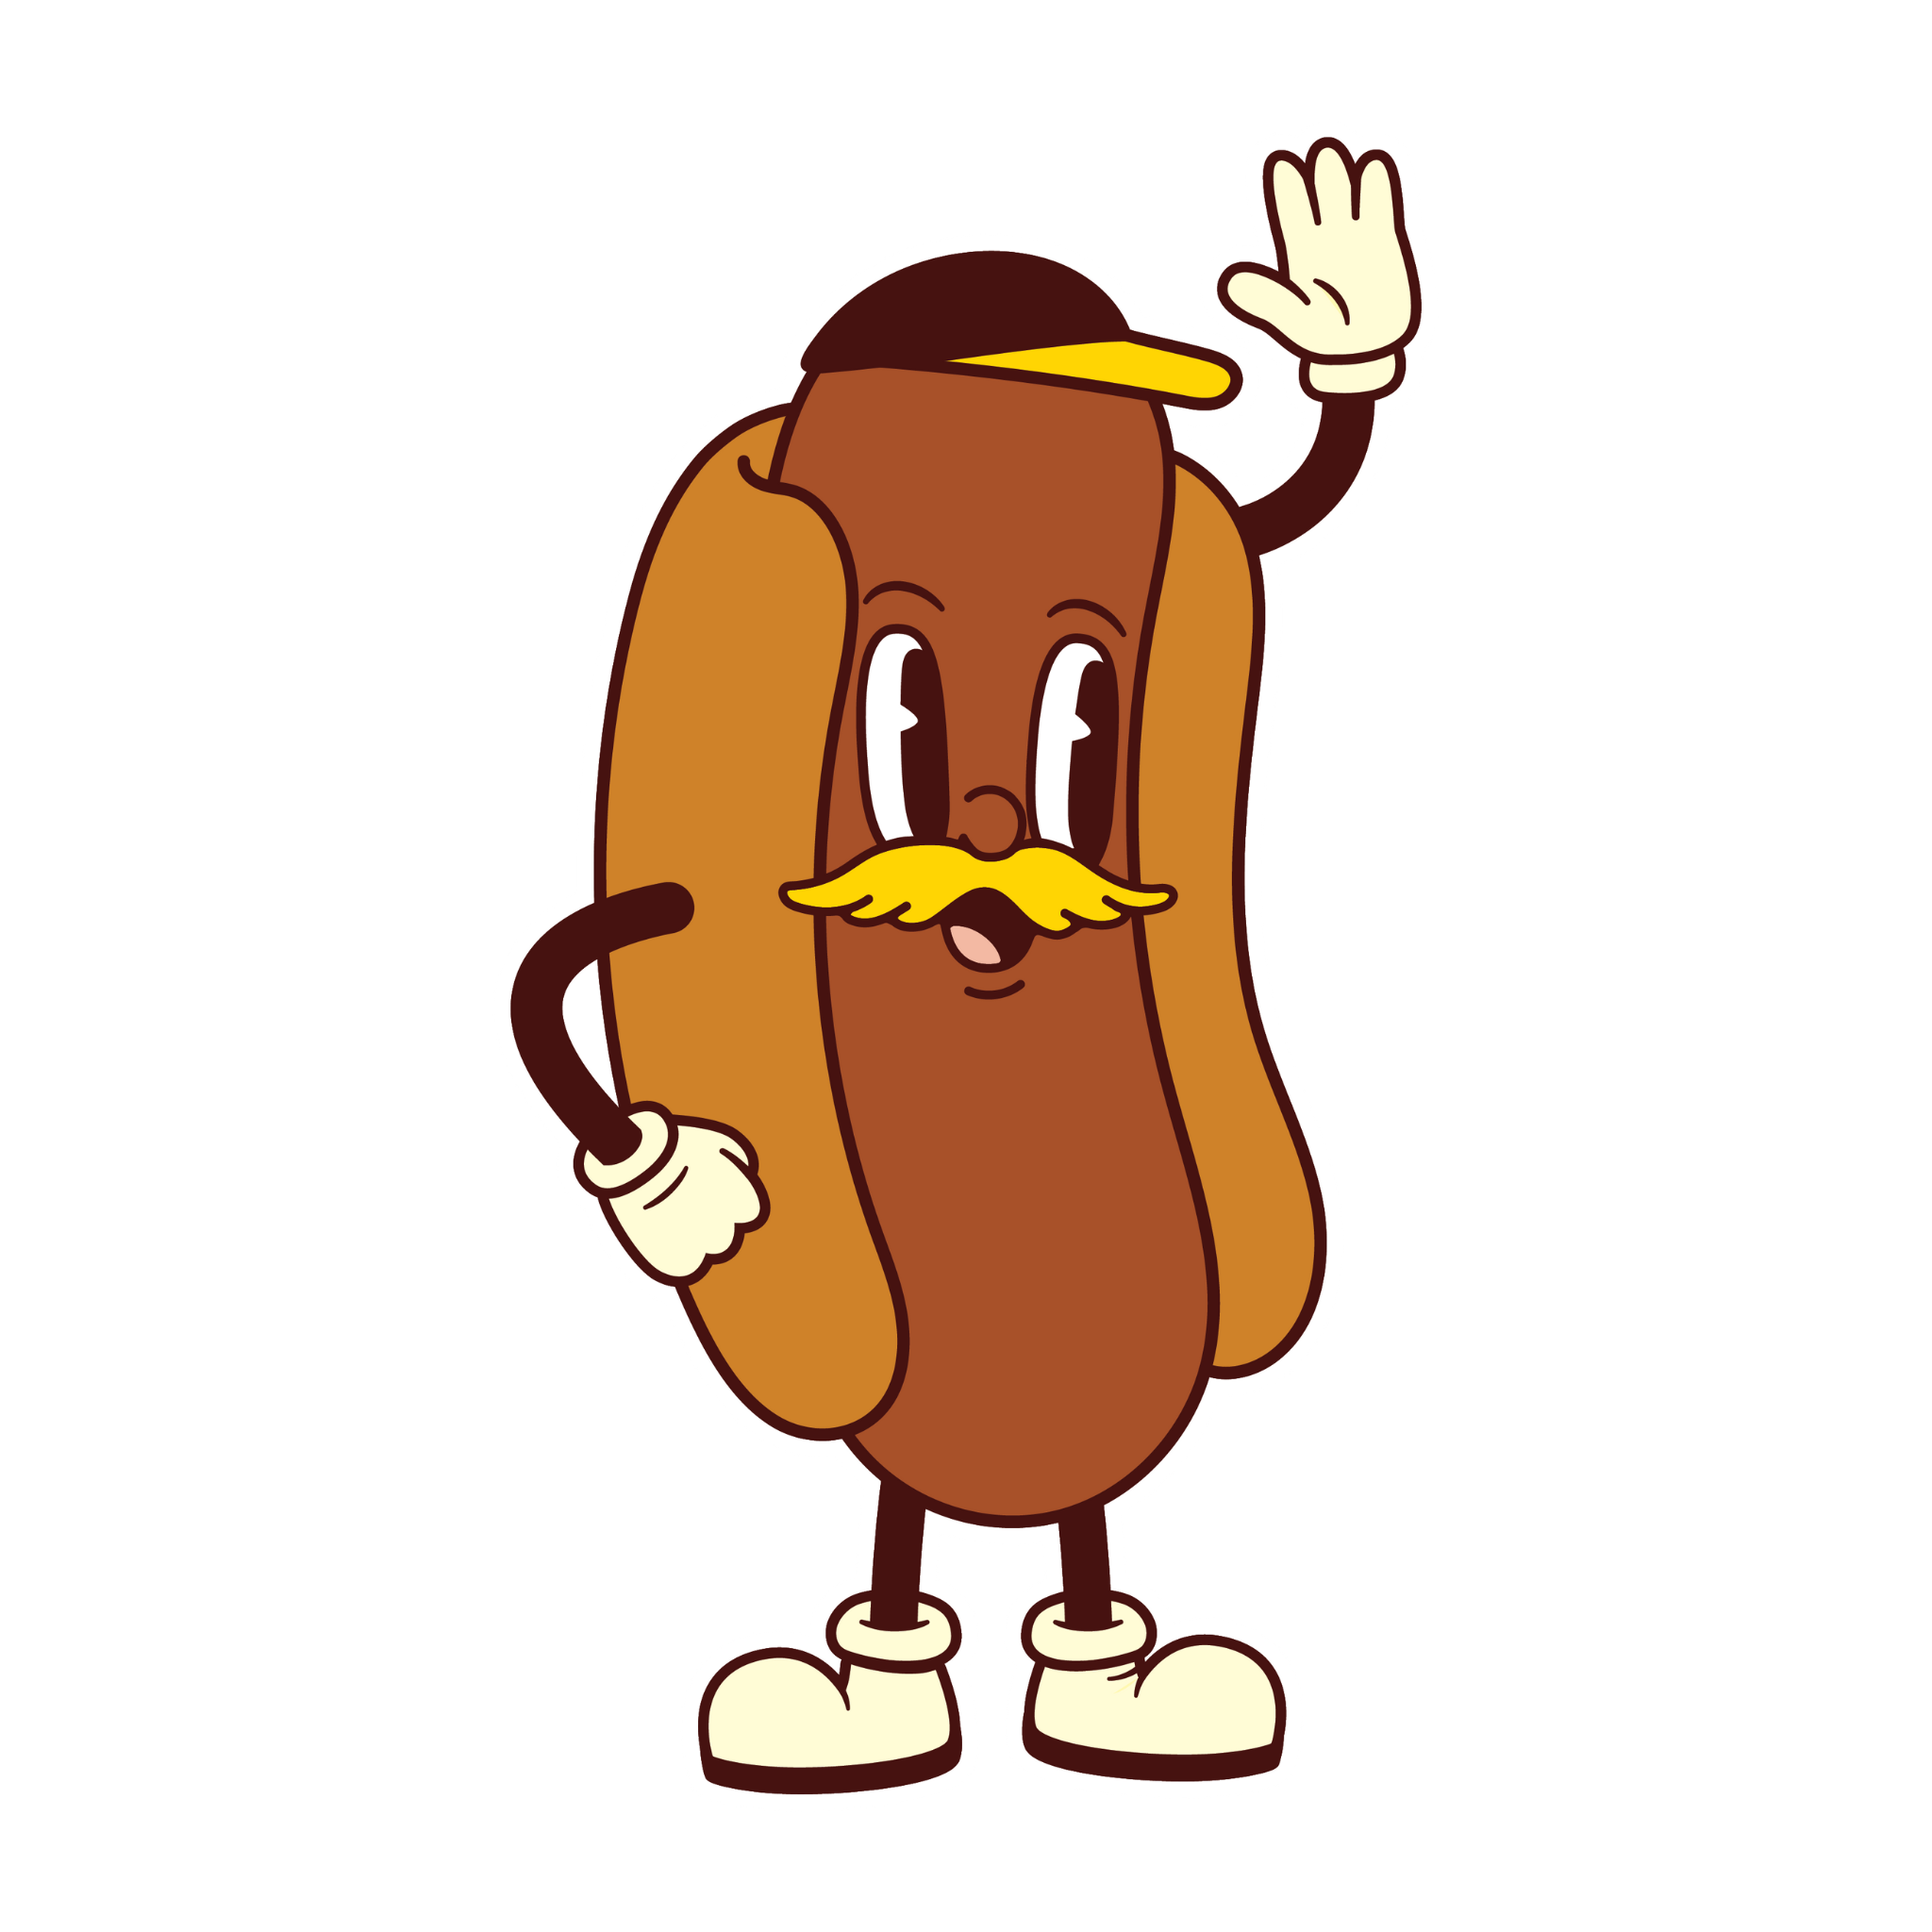 A hot dog with a smiling face & mustache, hands, and feet, is waving hello 